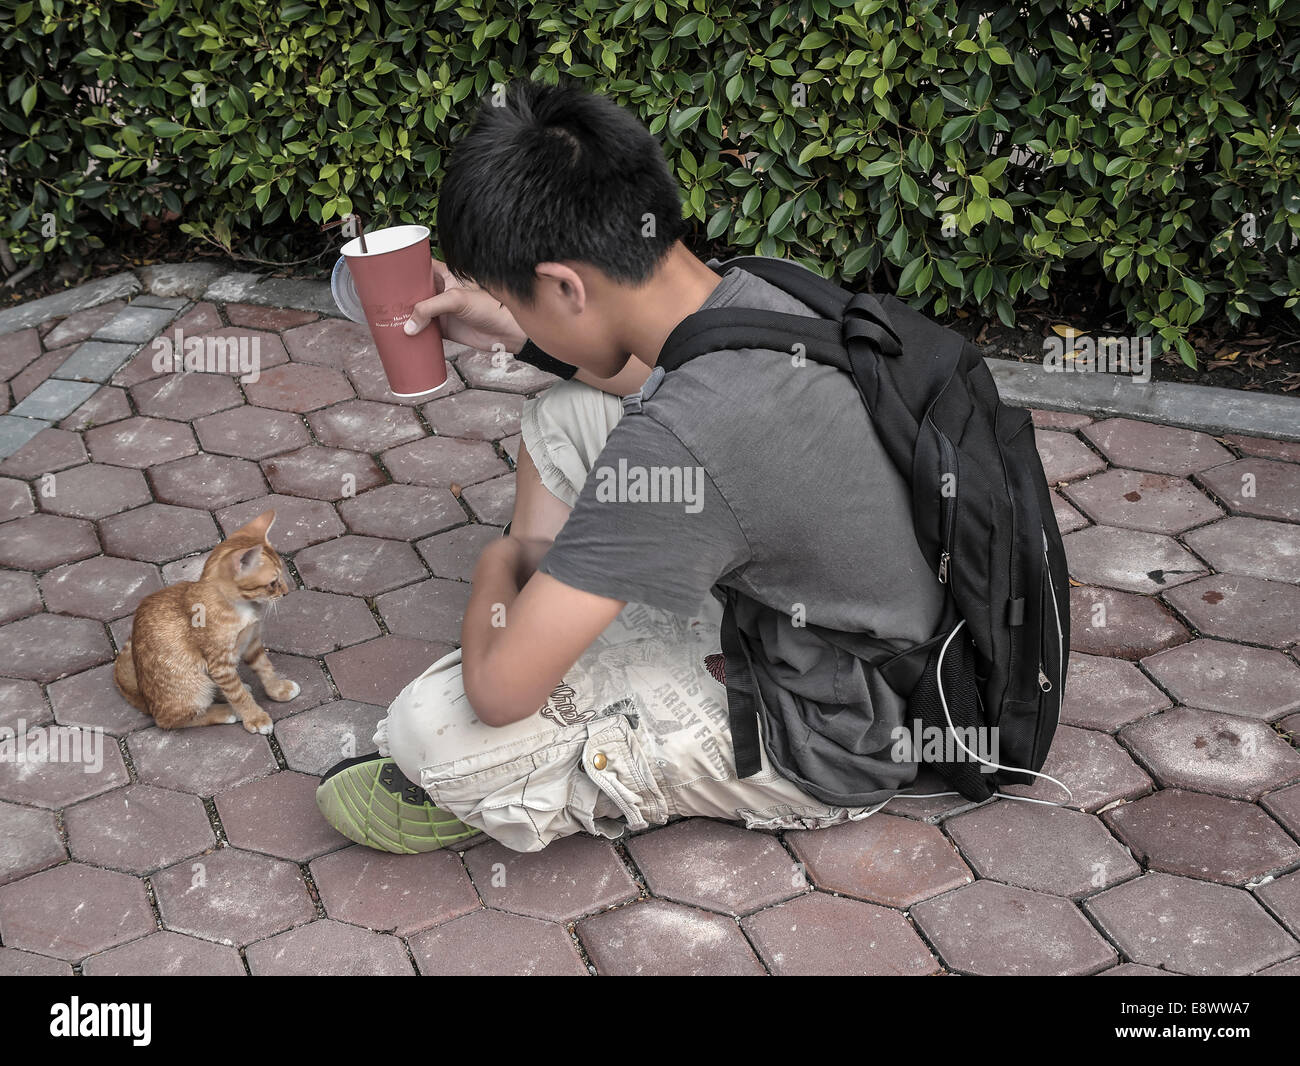 Young boy and his pet kitten. Human animal interaction. boy with cat Stock Photo